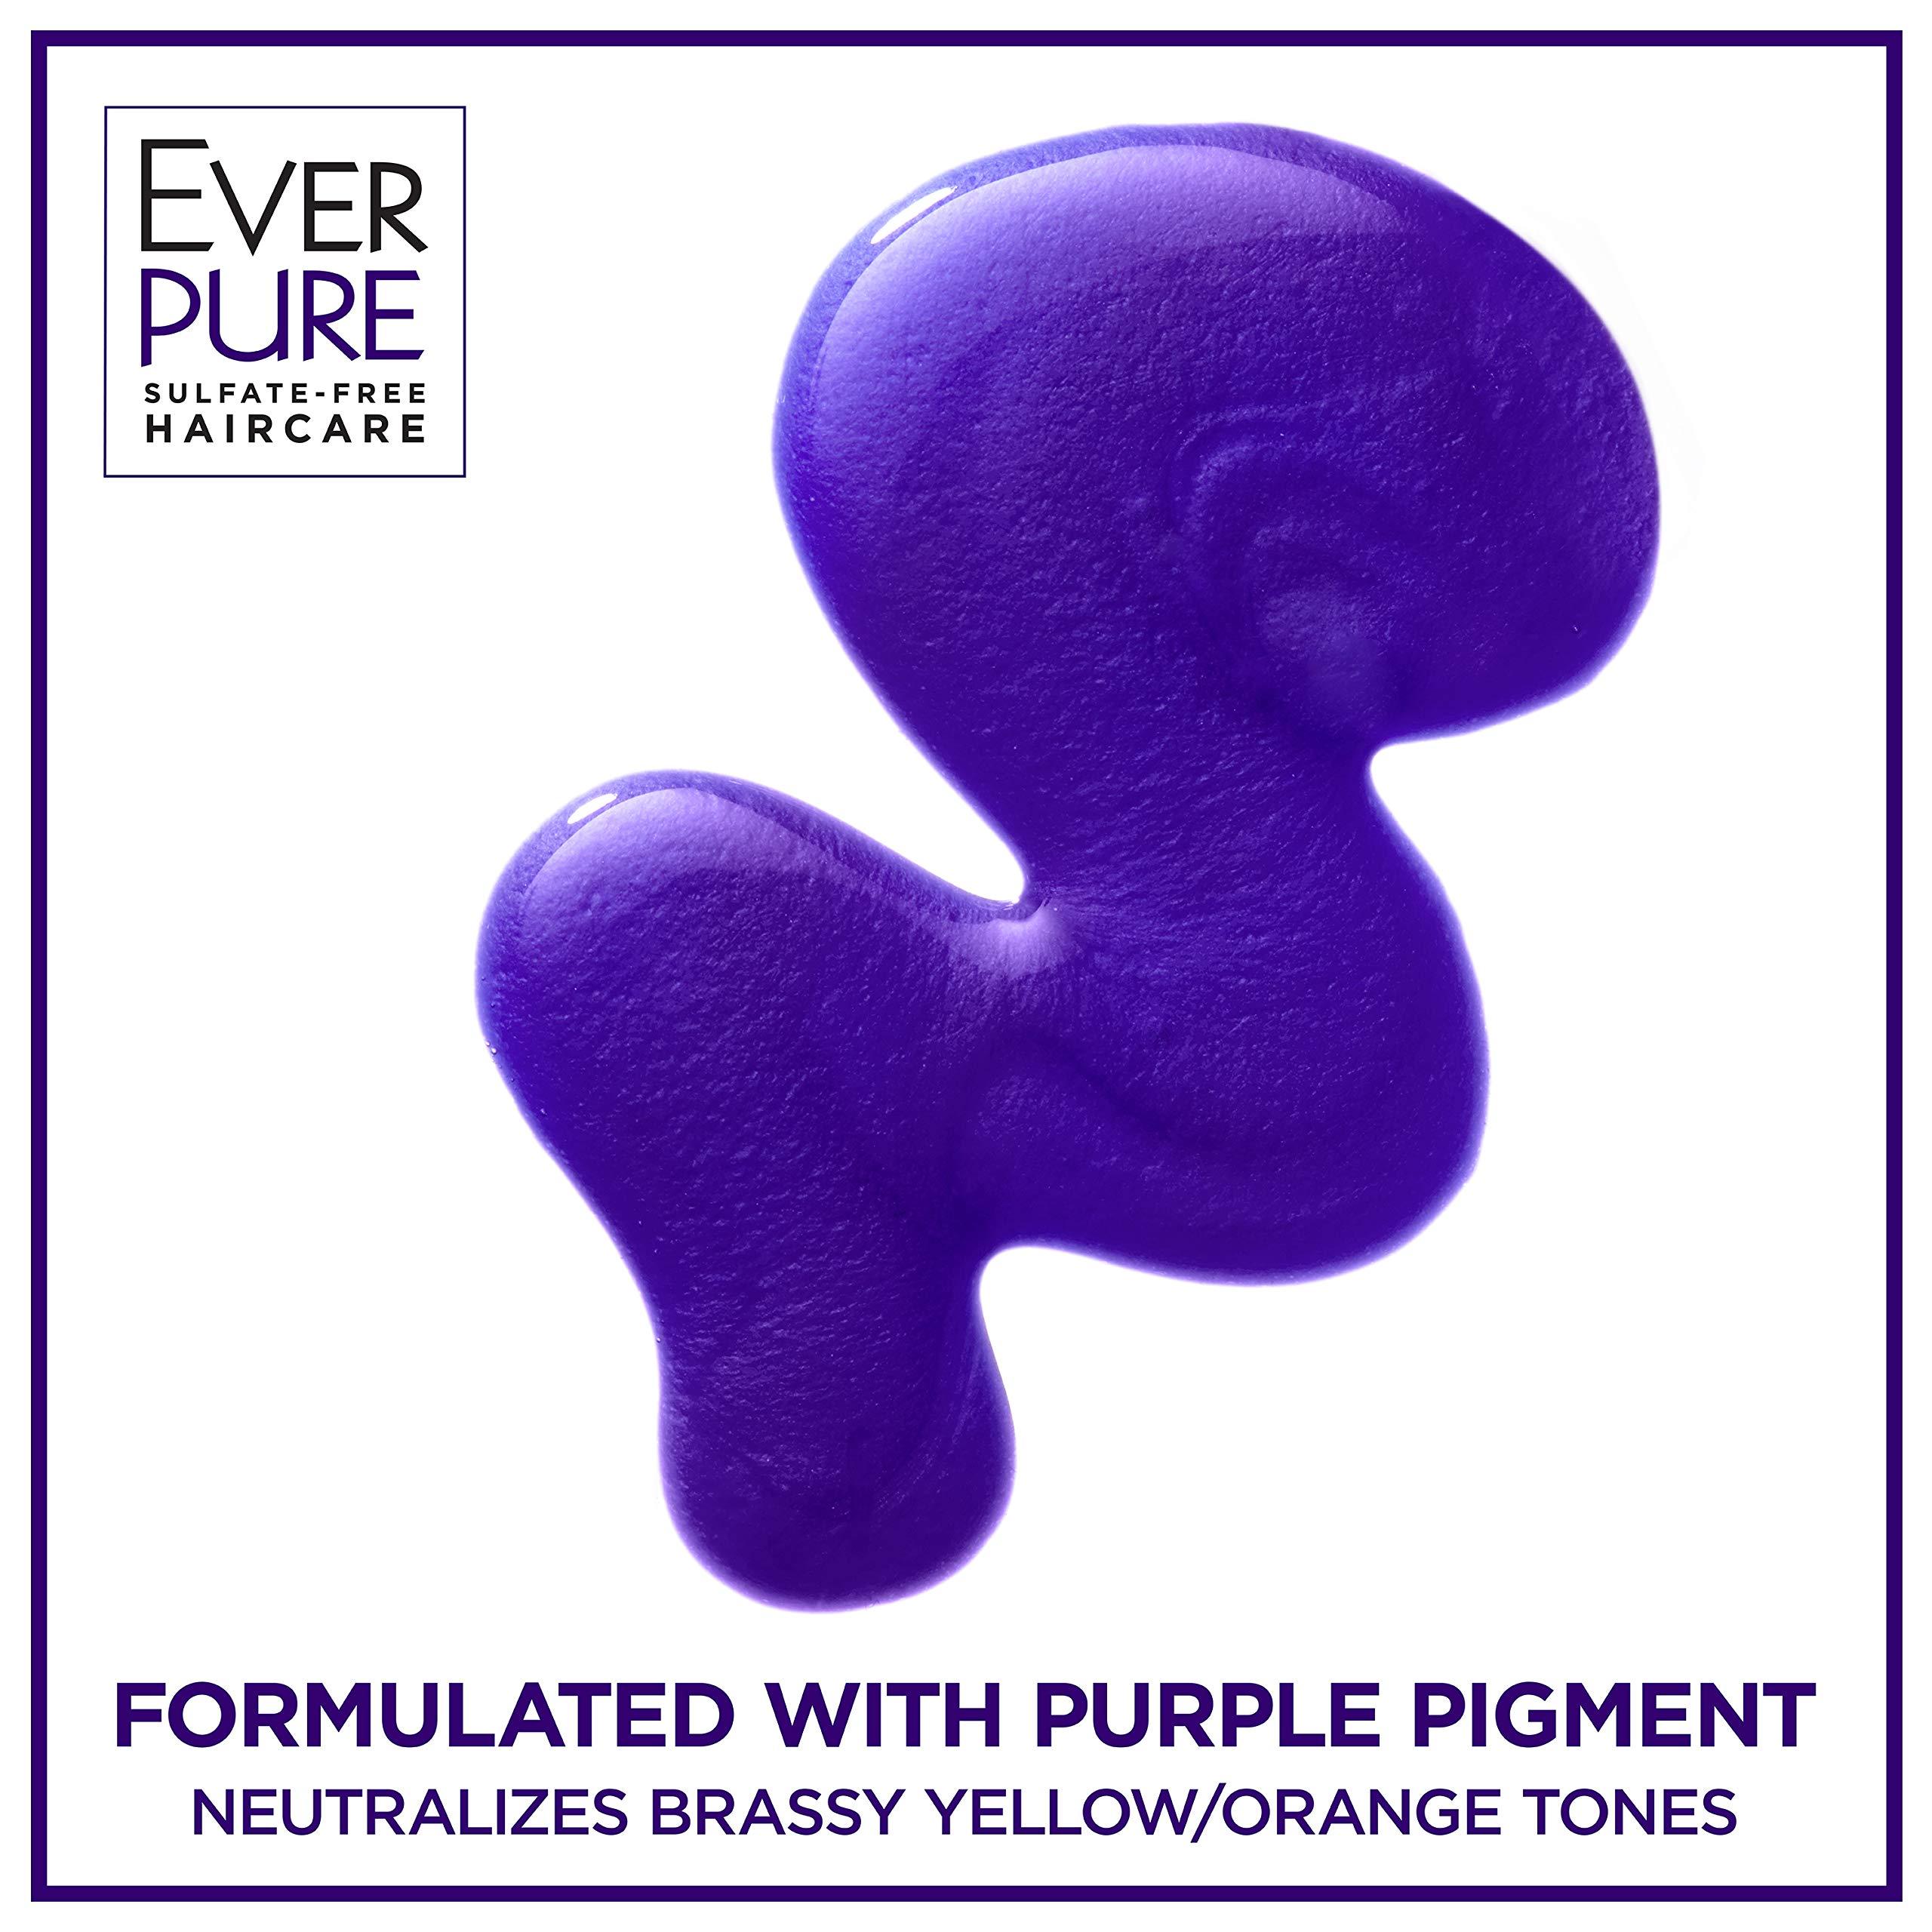 L'Oreal Paris EverPure Color Protection Purple Shampoo & Conditioner Full Size Set with Hibiscus - 2 Piece - image 5 of 6